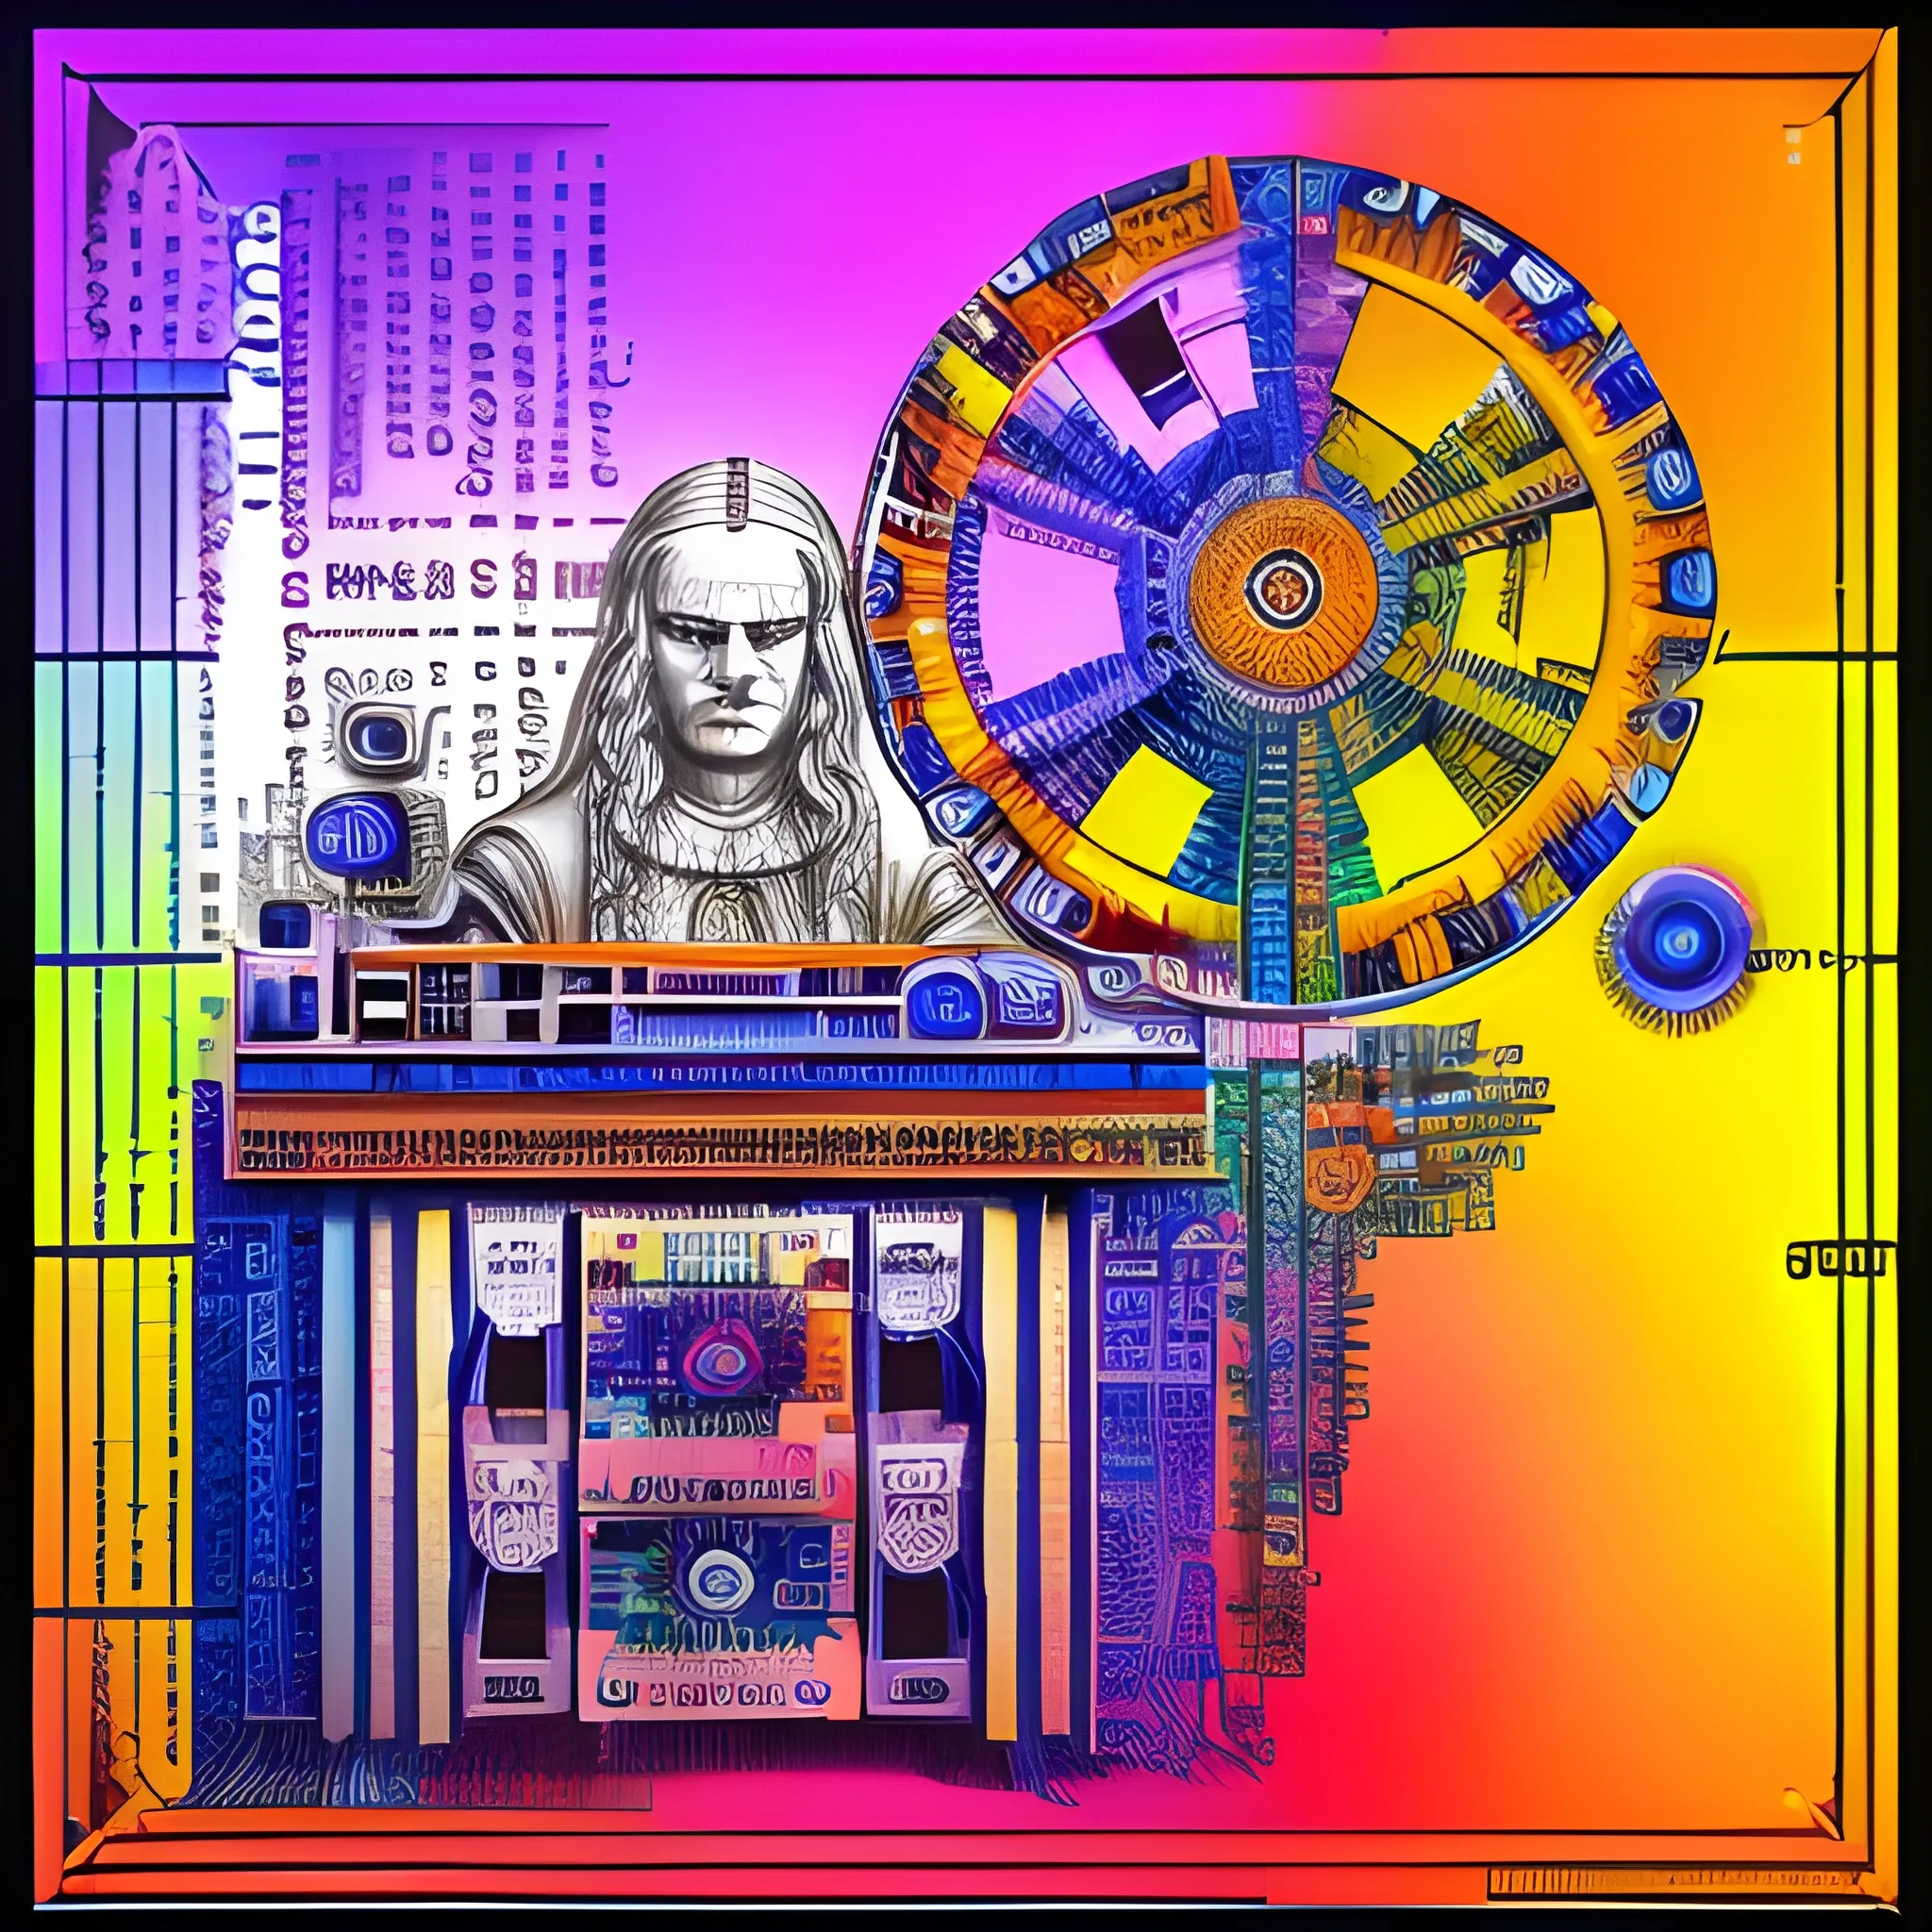 Generate a corporative, future, colorful, modern image, creative invention, related to digital products, Leonardo da Vinci using modern technology, do not use machines or txt and use really environment,Trippy